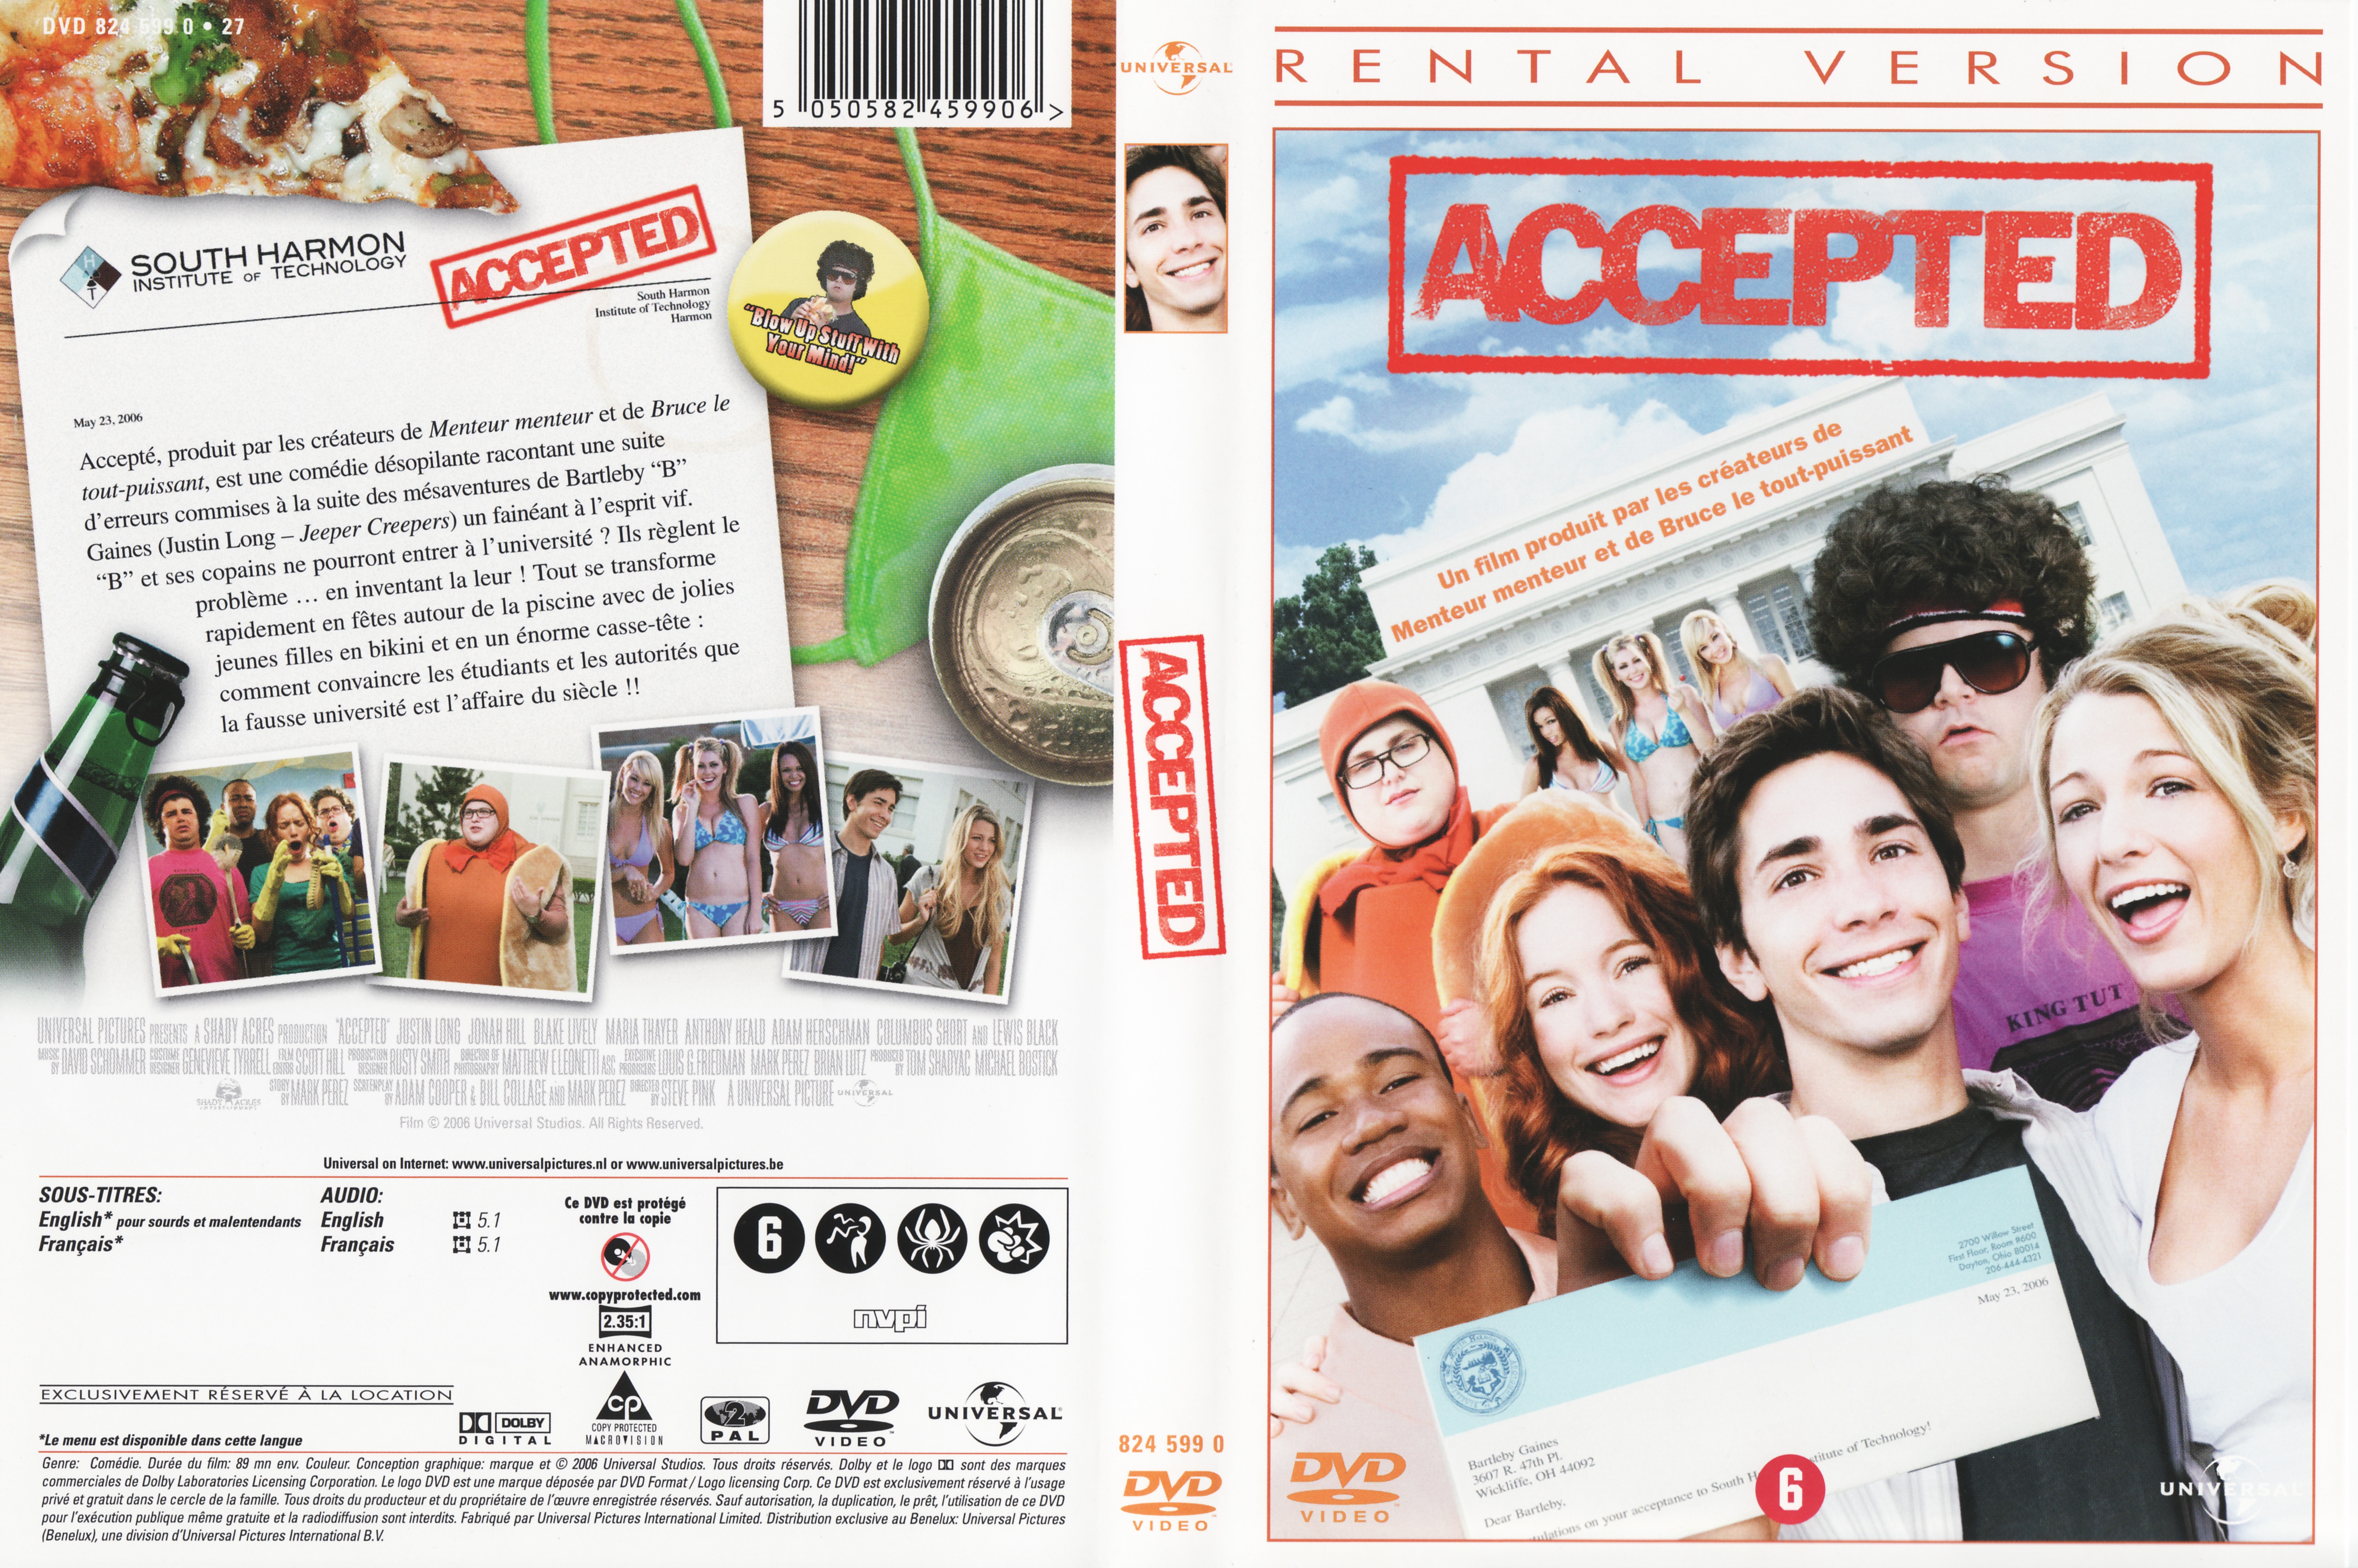 Jaquette DVD Accepted